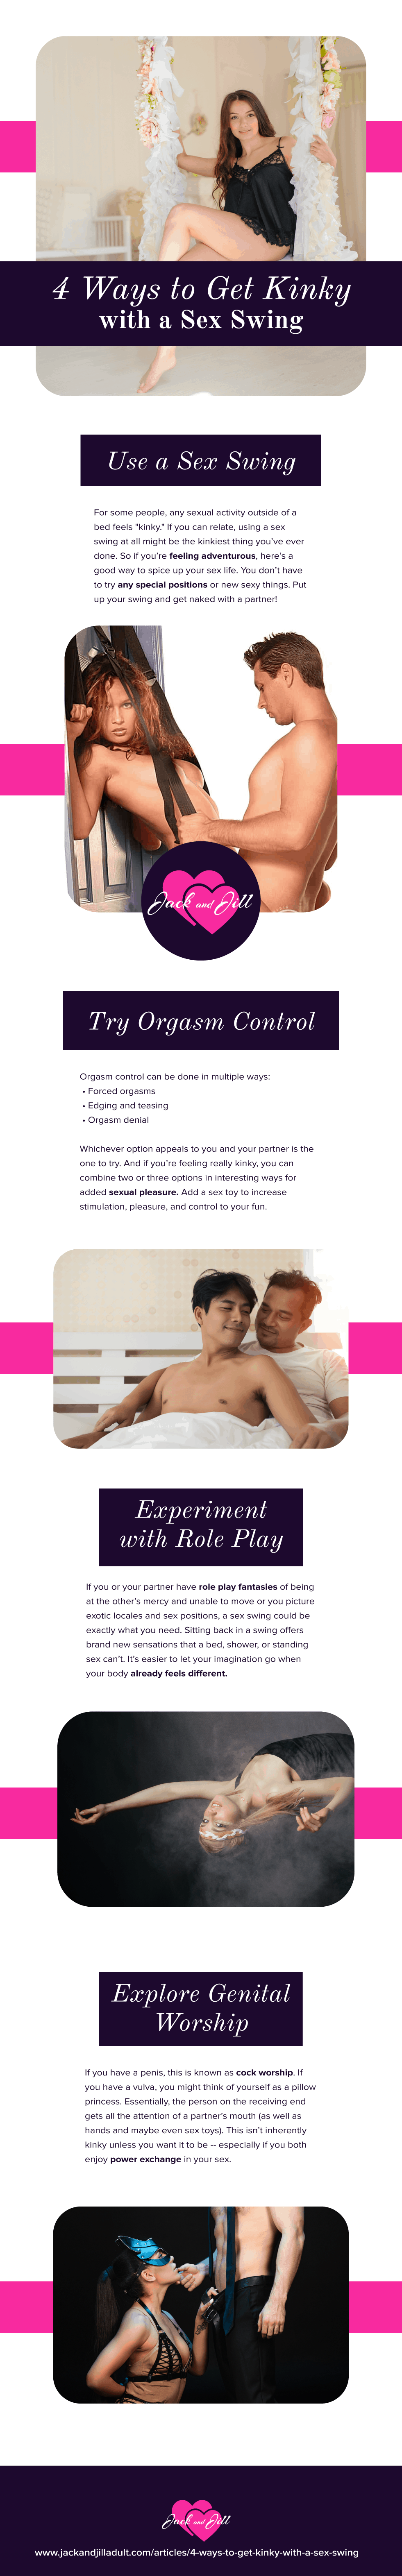 Infographic for 4 Ways to Get Kinky with a Sex Swing